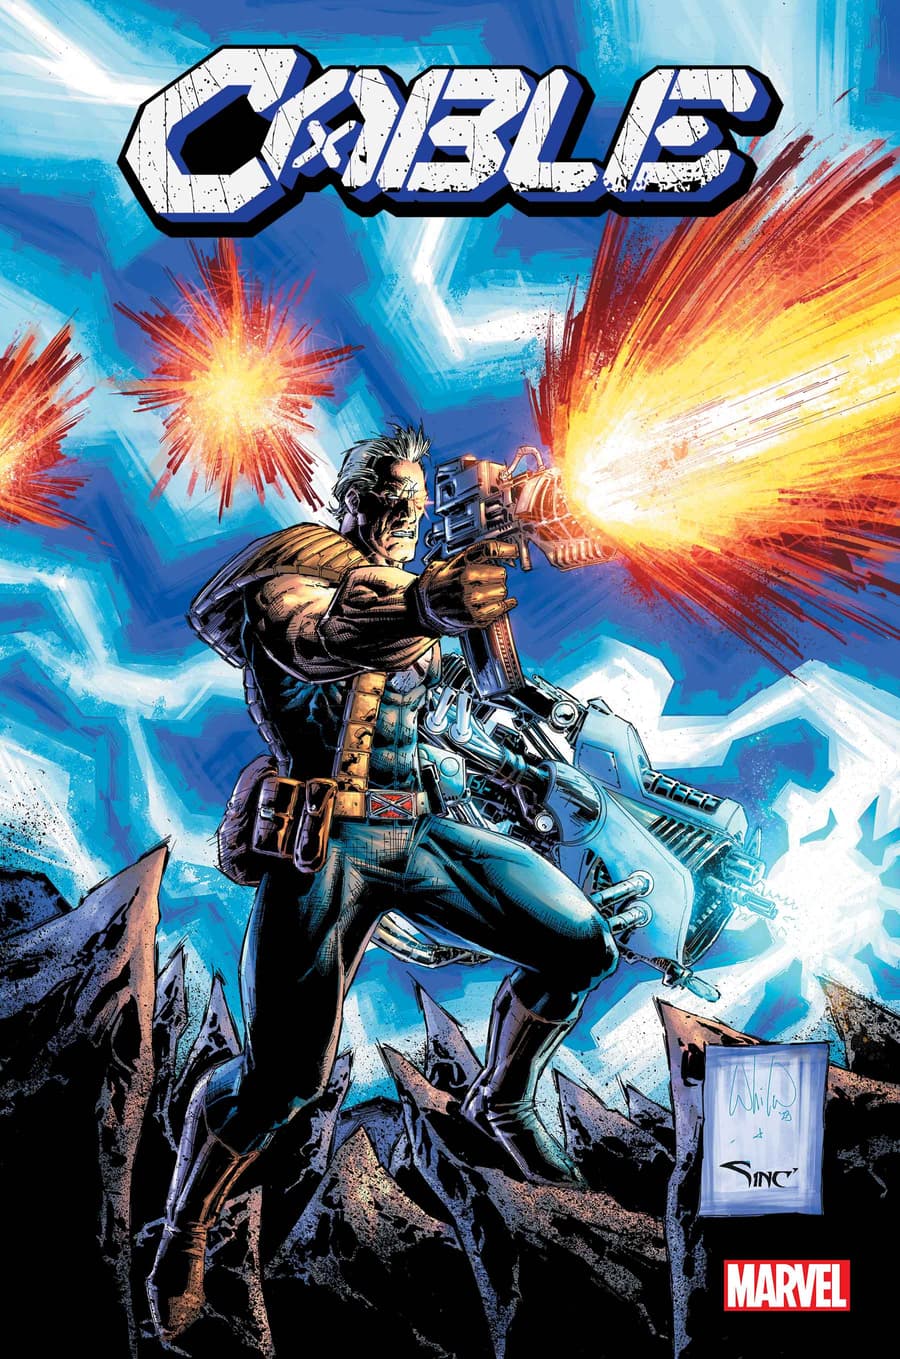 CABLE #1 cover by Whilce Portacio